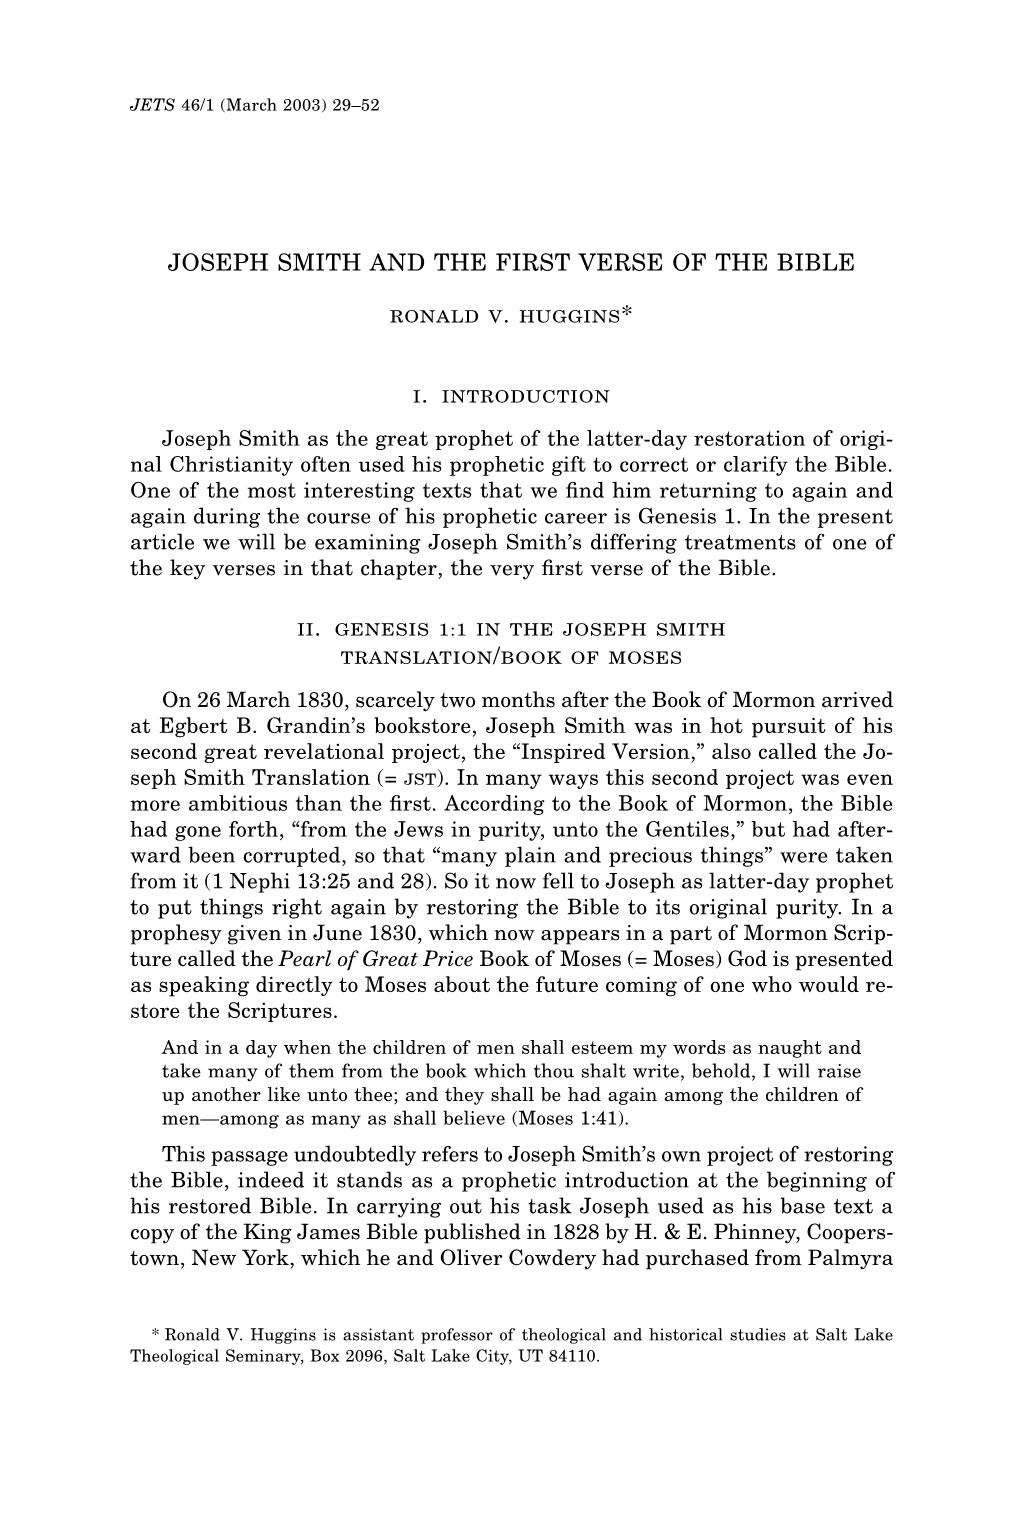 JOSEPH SMITH and the FIRST VERSE of the BIBLE . . . Ronald V. Huggins